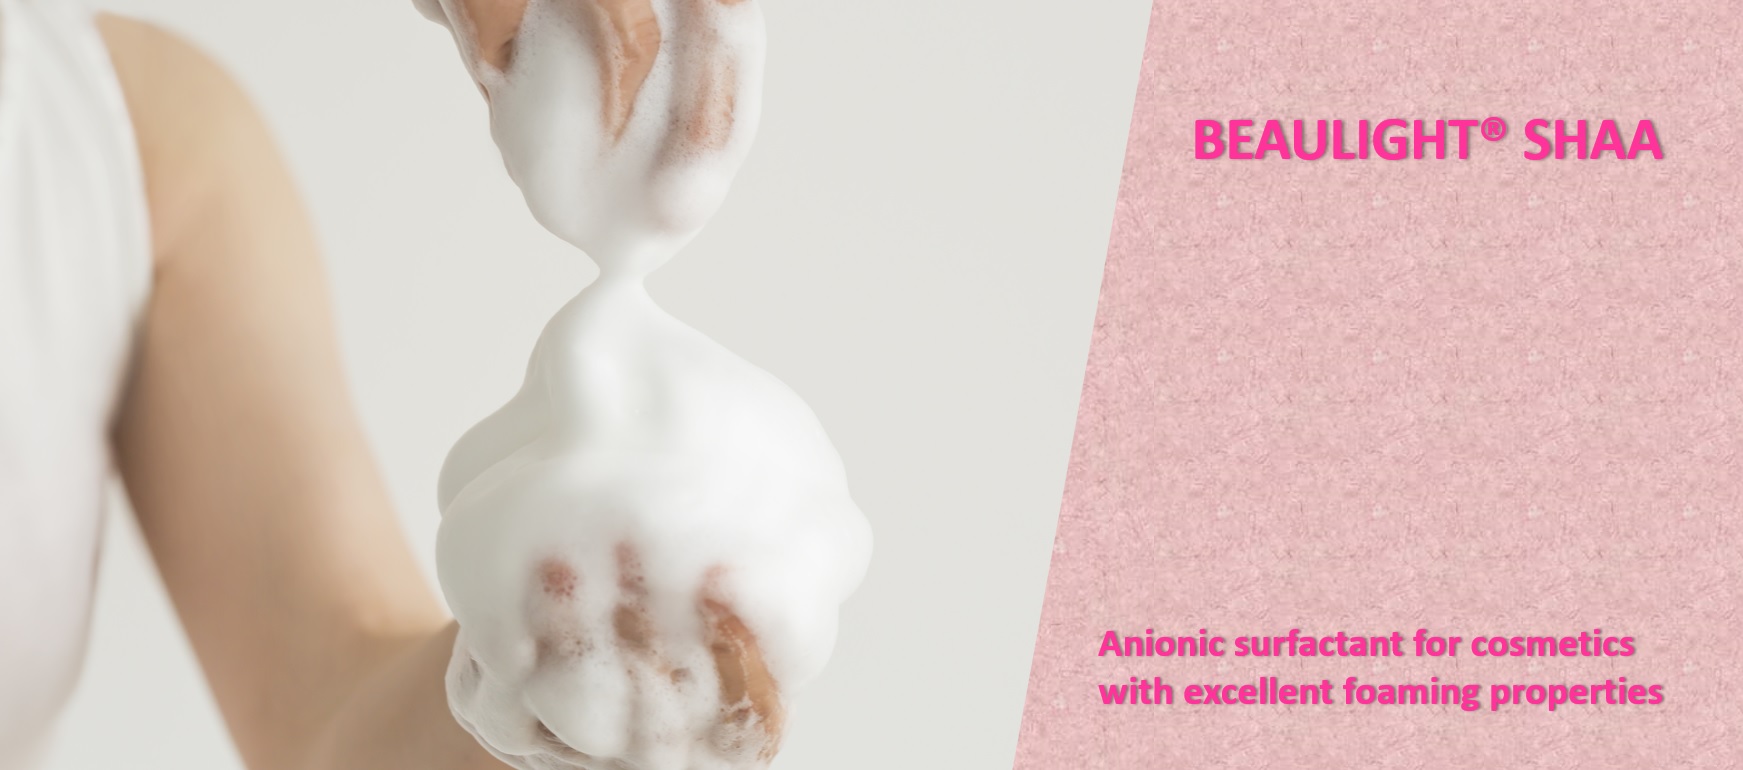 Anionic Surfactant for Cosmetics with Excellent Foaming Properties "BEAULIGHT® SHAA" page is now open.